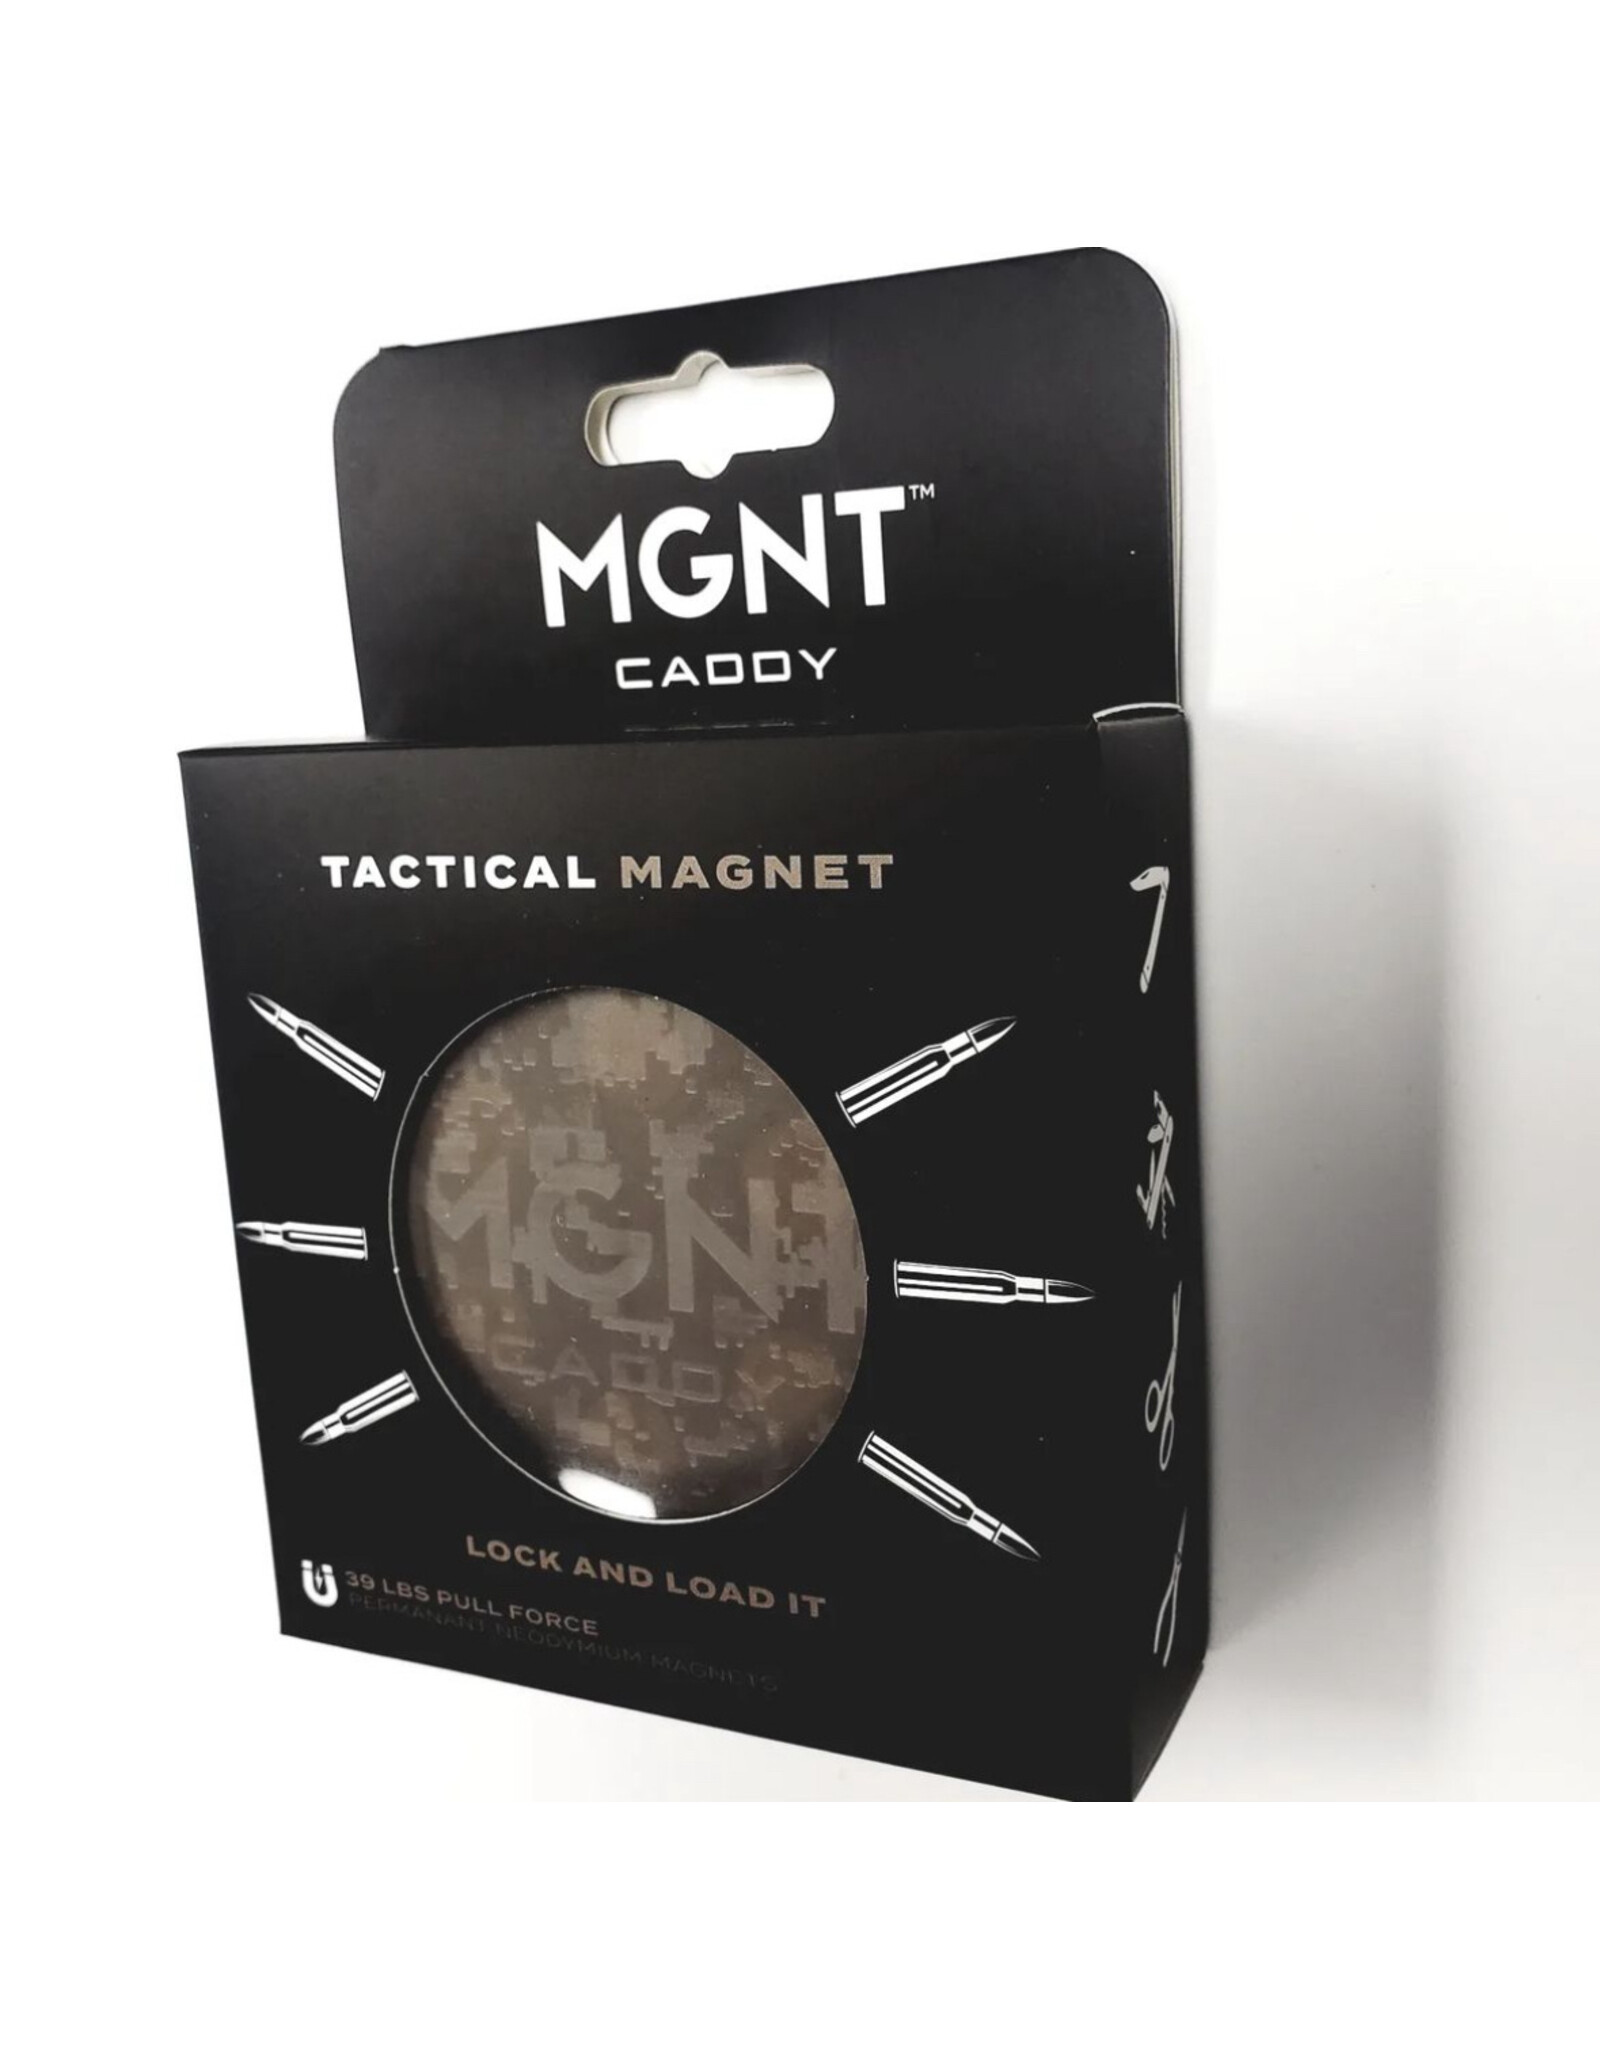 MGNT CADDY MGNT CADDY - TACTICAL MAGNET